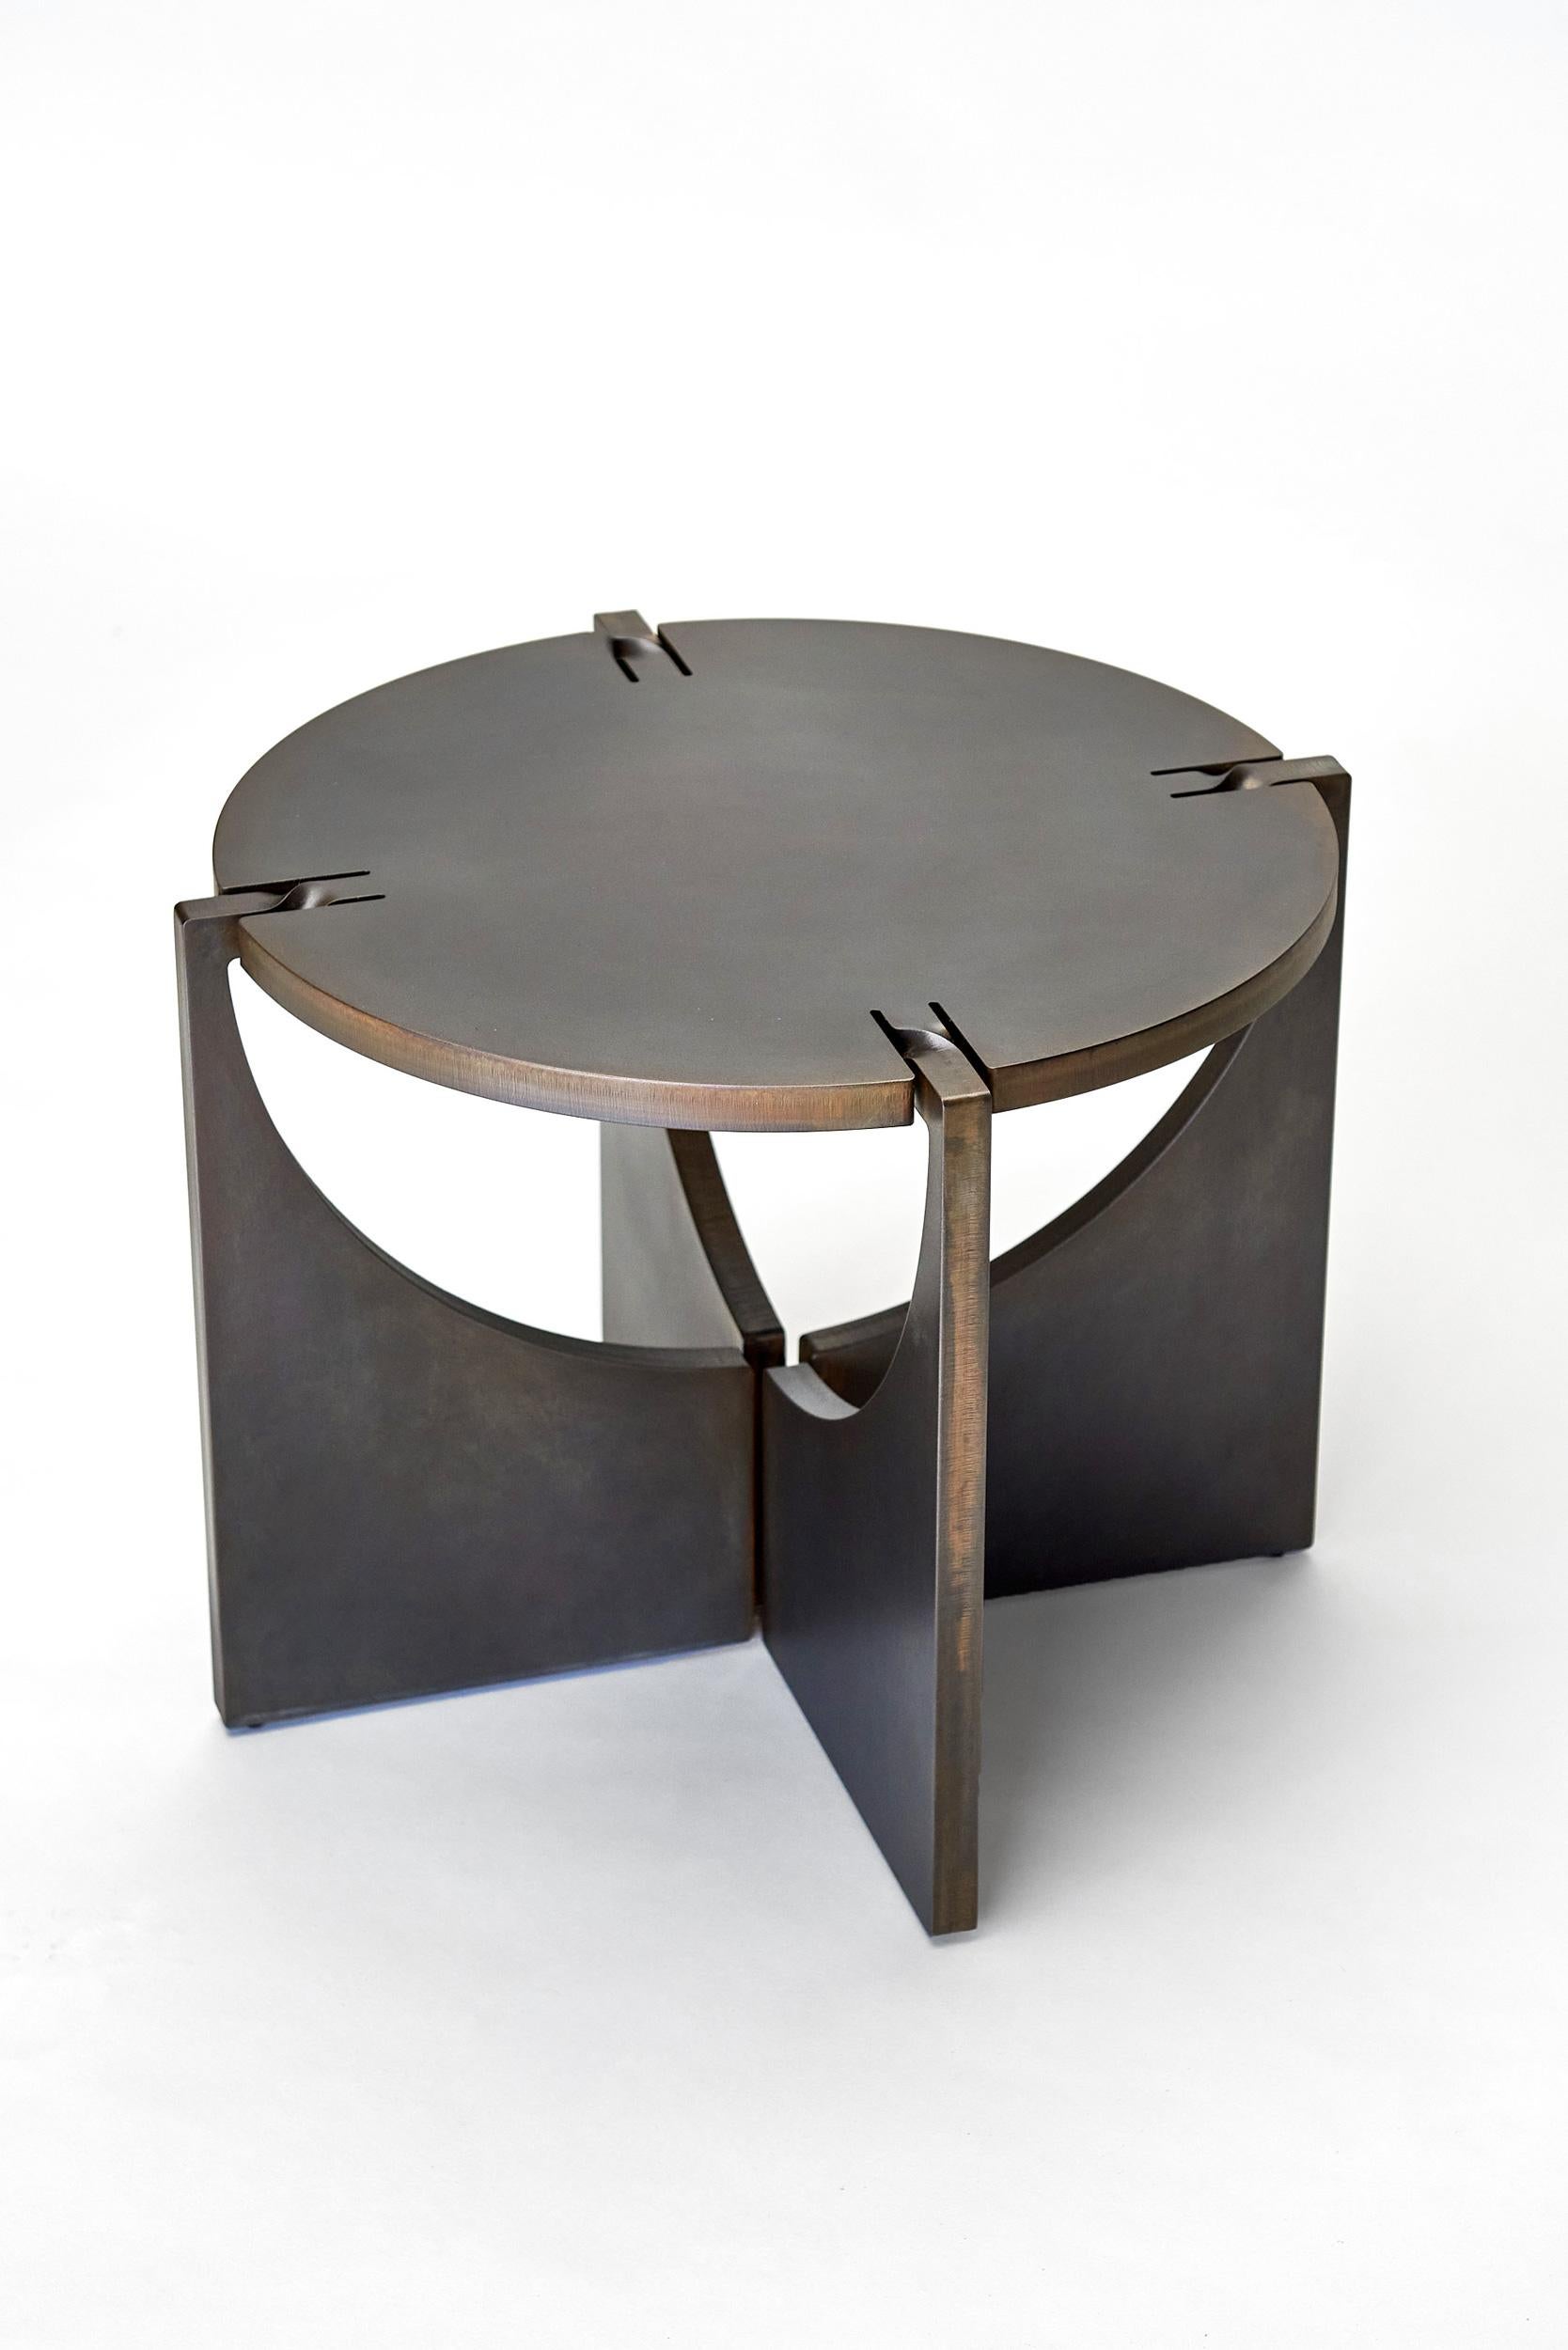 Round - ONE is part of the ONE series

ONE is a single sheet of metal. From its flat shape as a sheet it is forged and bended into the third dimension. This movement is visible in its shape. It shows the strength of the steel and combines old